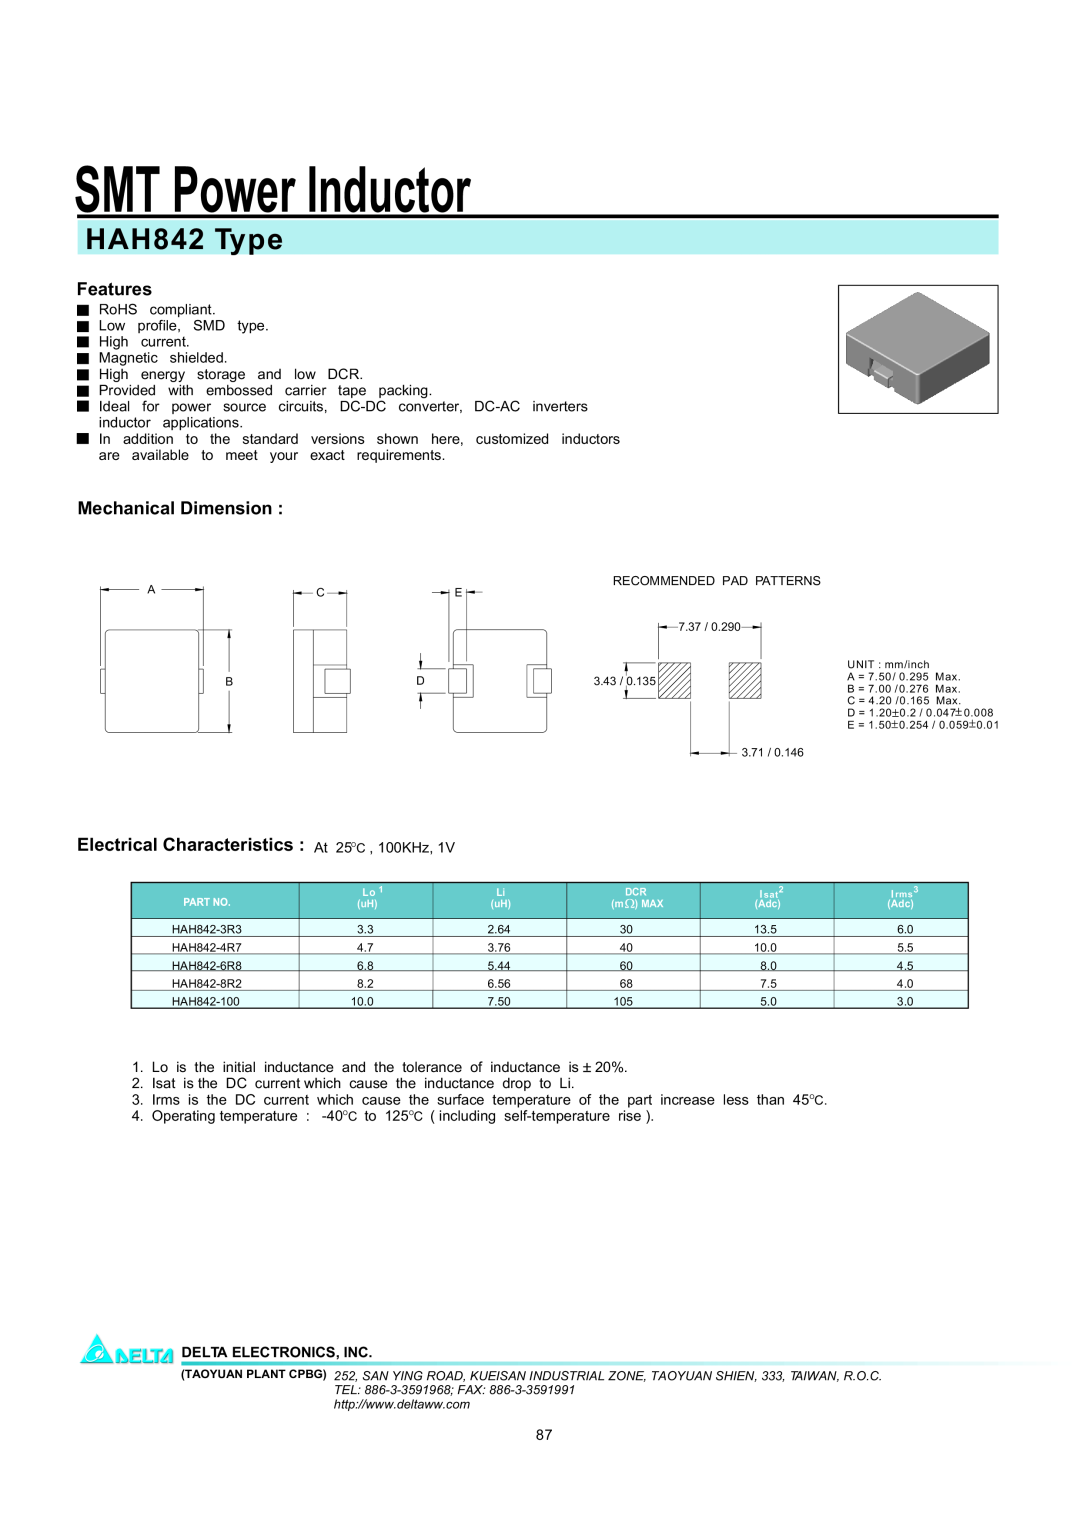 Delta Electronics manual SMT Power Inductor, HAH842 Type, Features, Mechanical Dimension, Delta Electronics, Inc 